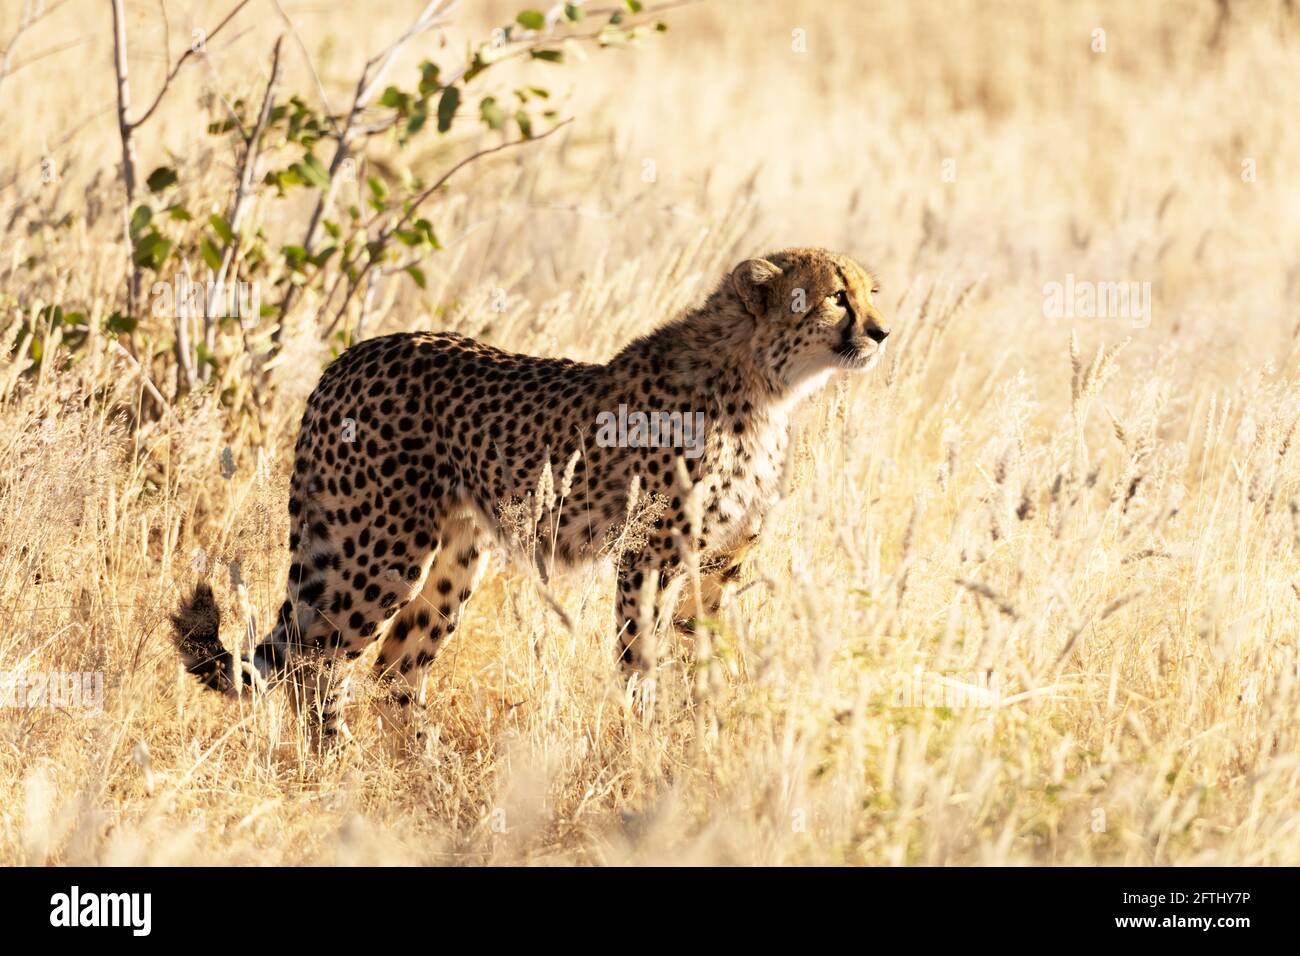 Cheetah standing on dry yellow grass of the African savannah Stock Photo